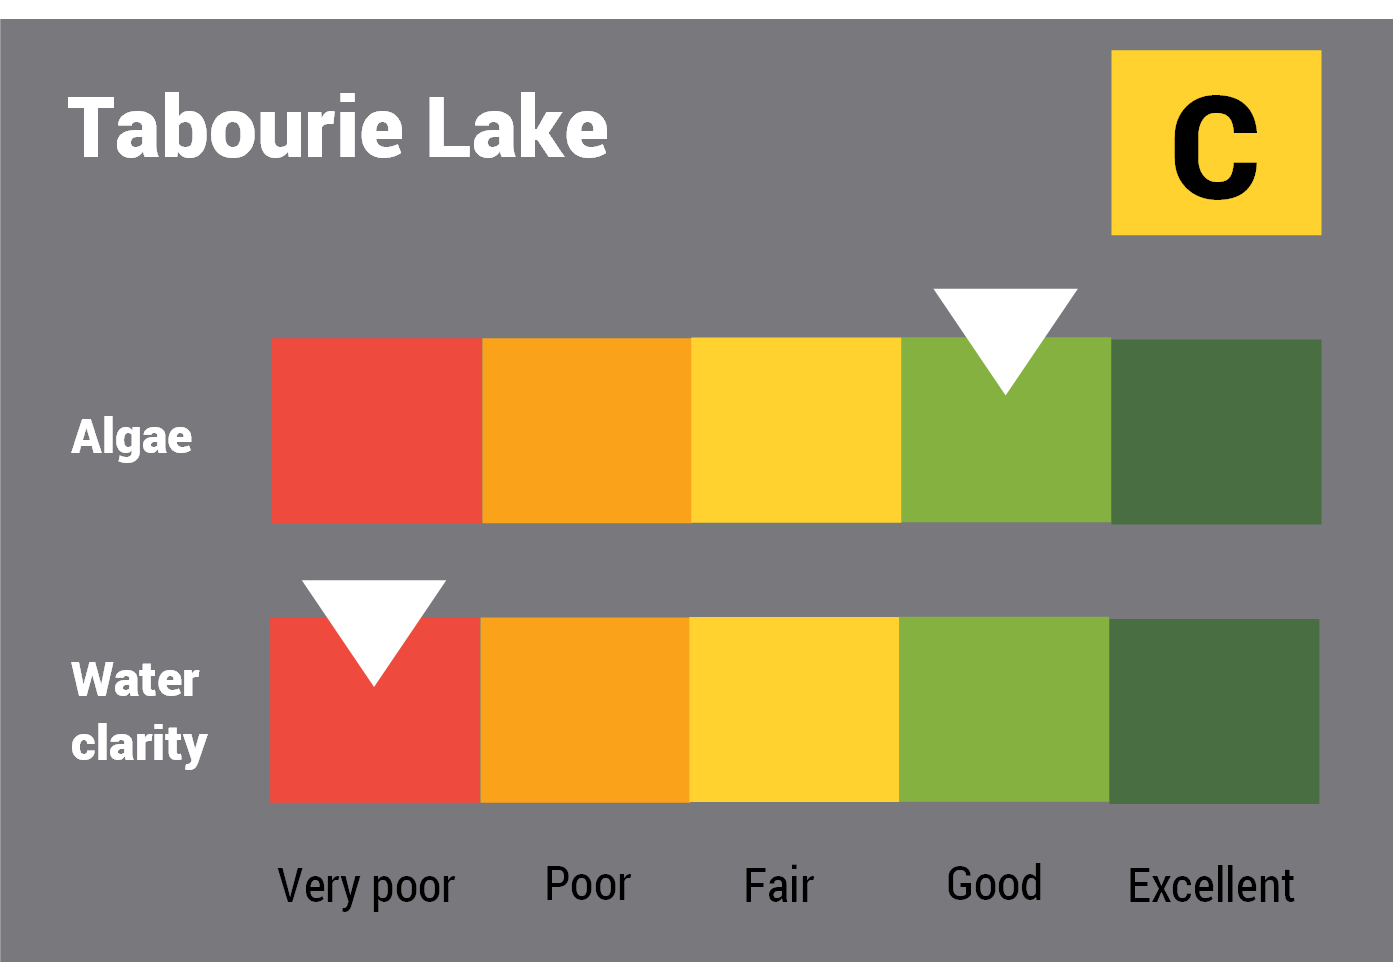 Tabourie Lake water quality report card for algae and water clarity showing colour-coded ratings (red, orange, yellow, light green and dark green, which represent very poor, poor, fair, good and excellent, respectively). Algae is rated 'poor' and water clarity is rated 'fair' giving an overall rating of 'fair' or 'C'.